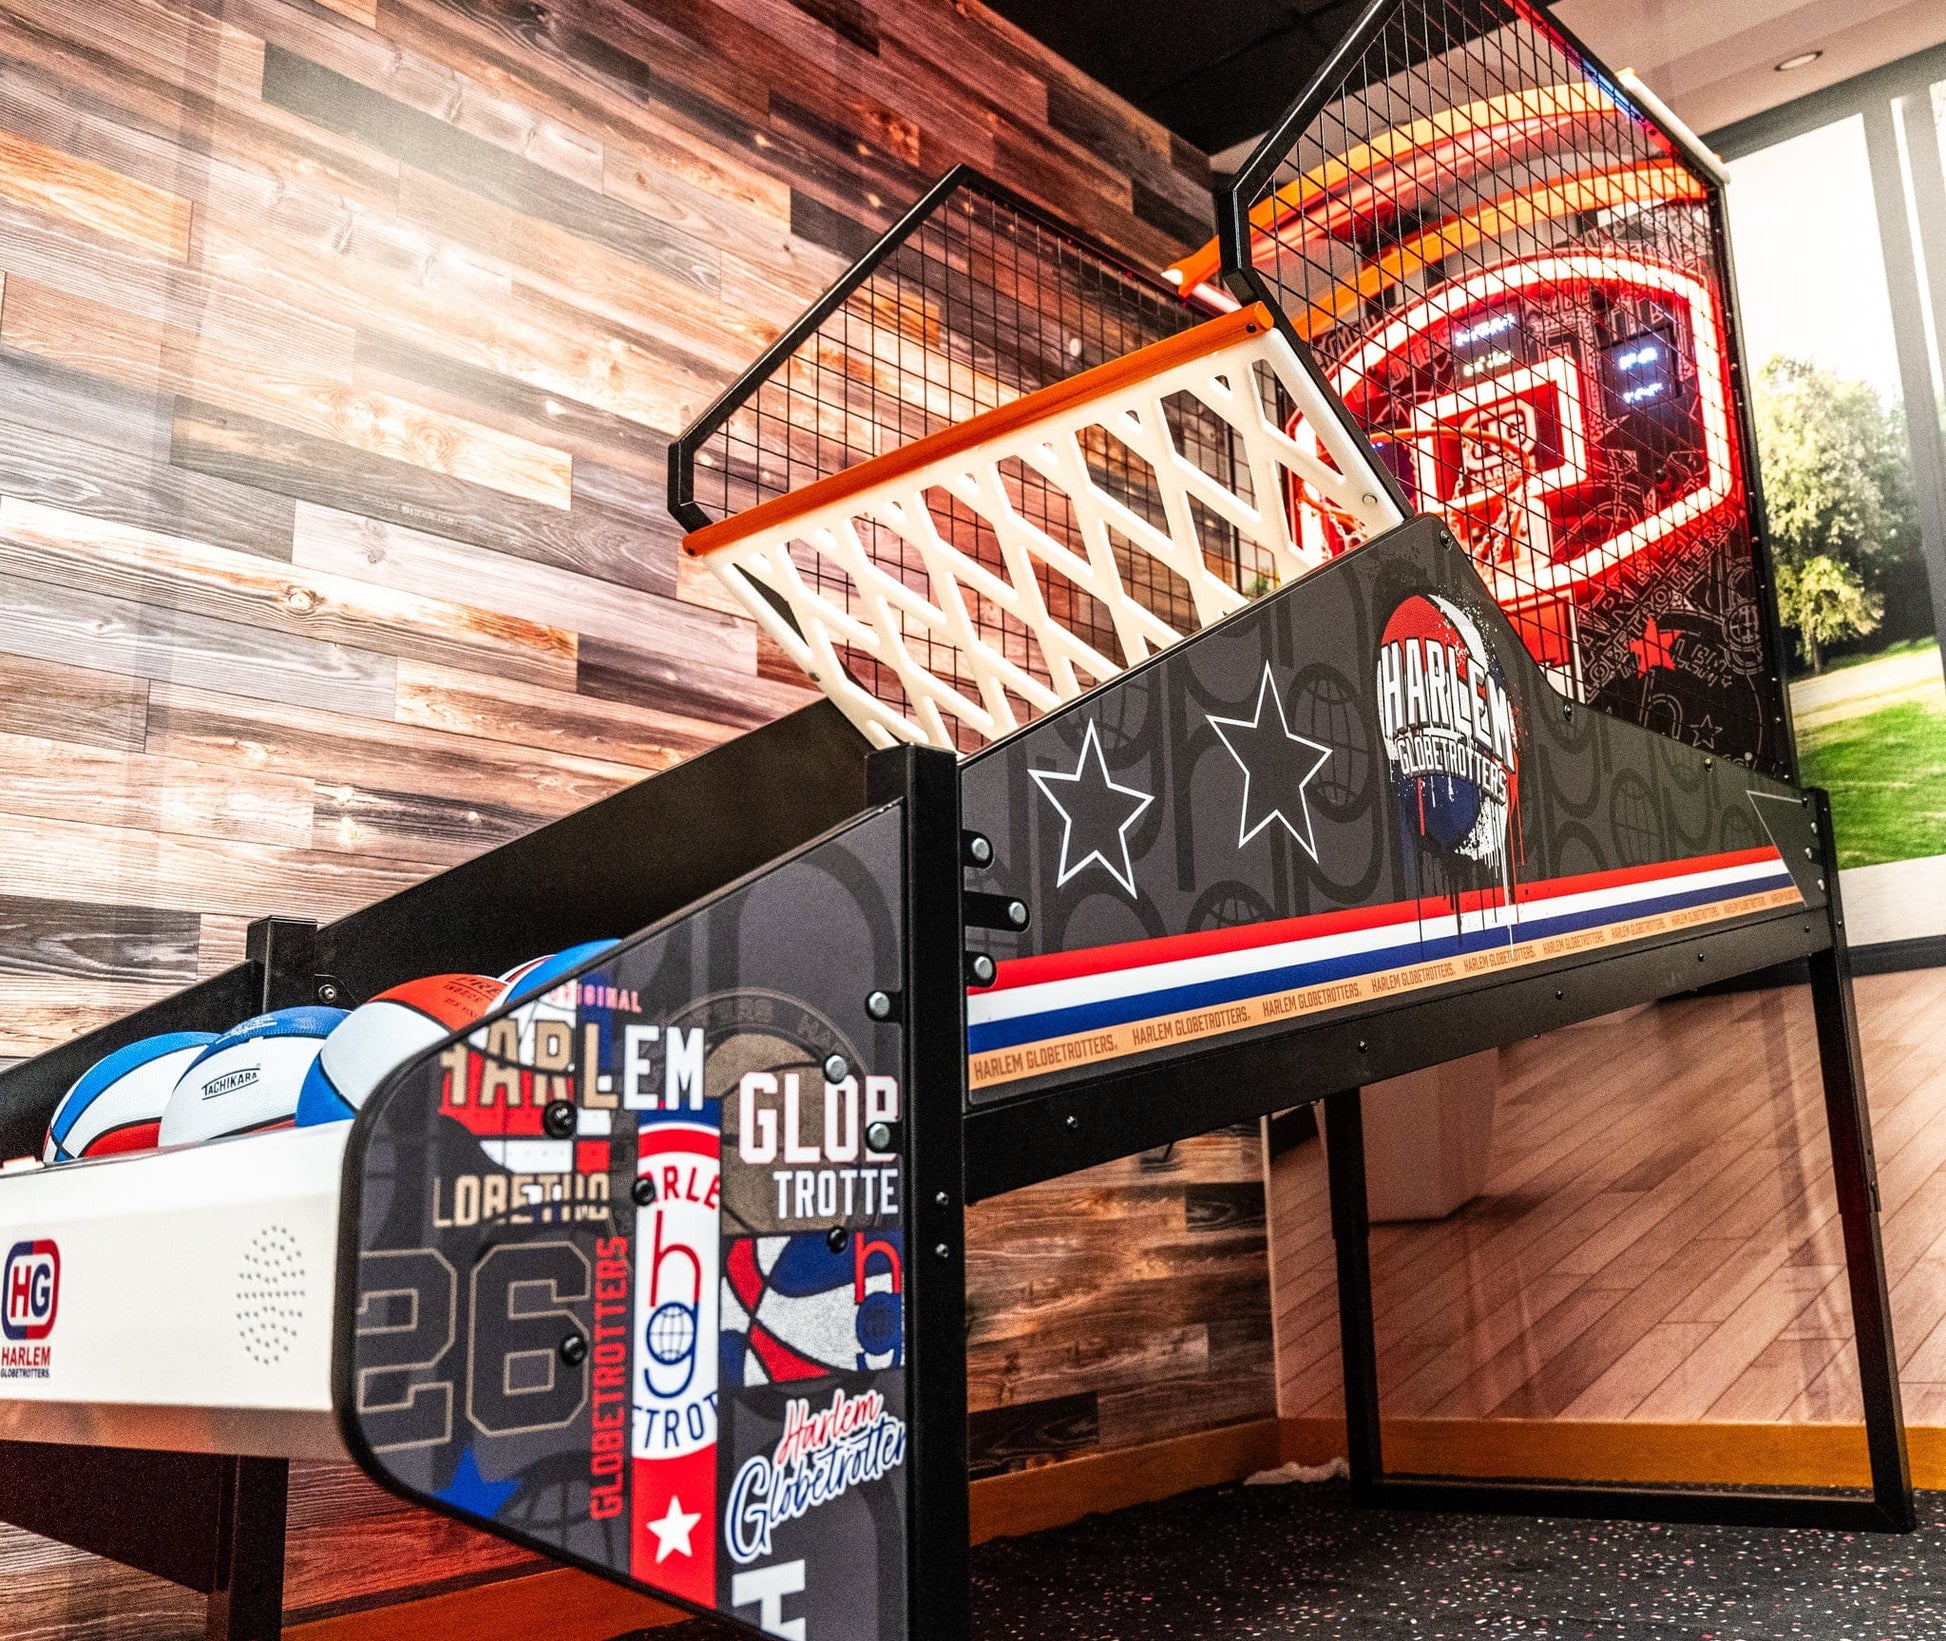 Harlem Globetrotters "Modern" game with Floor Mat  Innovative Concepts in Entertainment, Inc.   